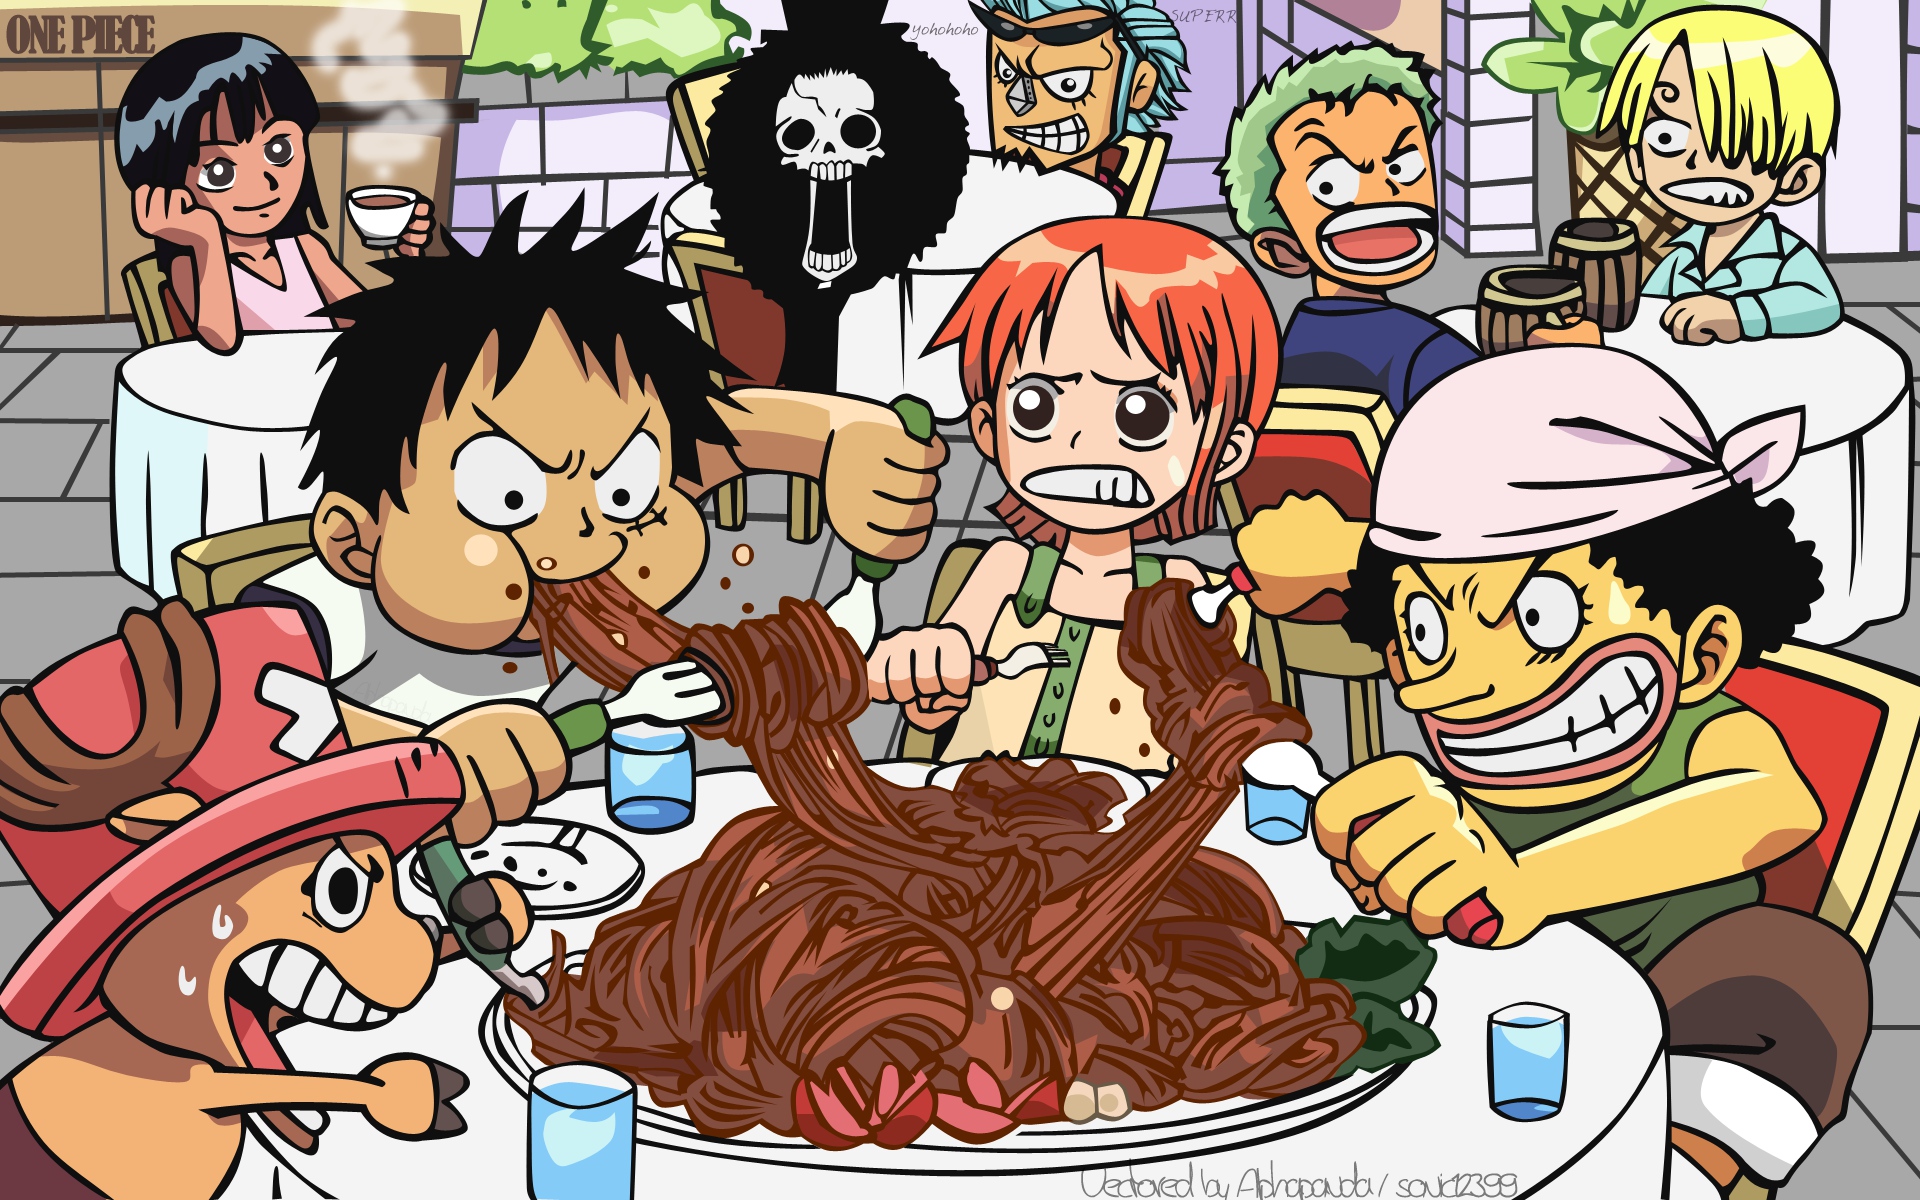 Anime characters from One Piece series - Nami, Luffy, Zoro, Sanji, Usopp, Robin, Franky, and Brook.